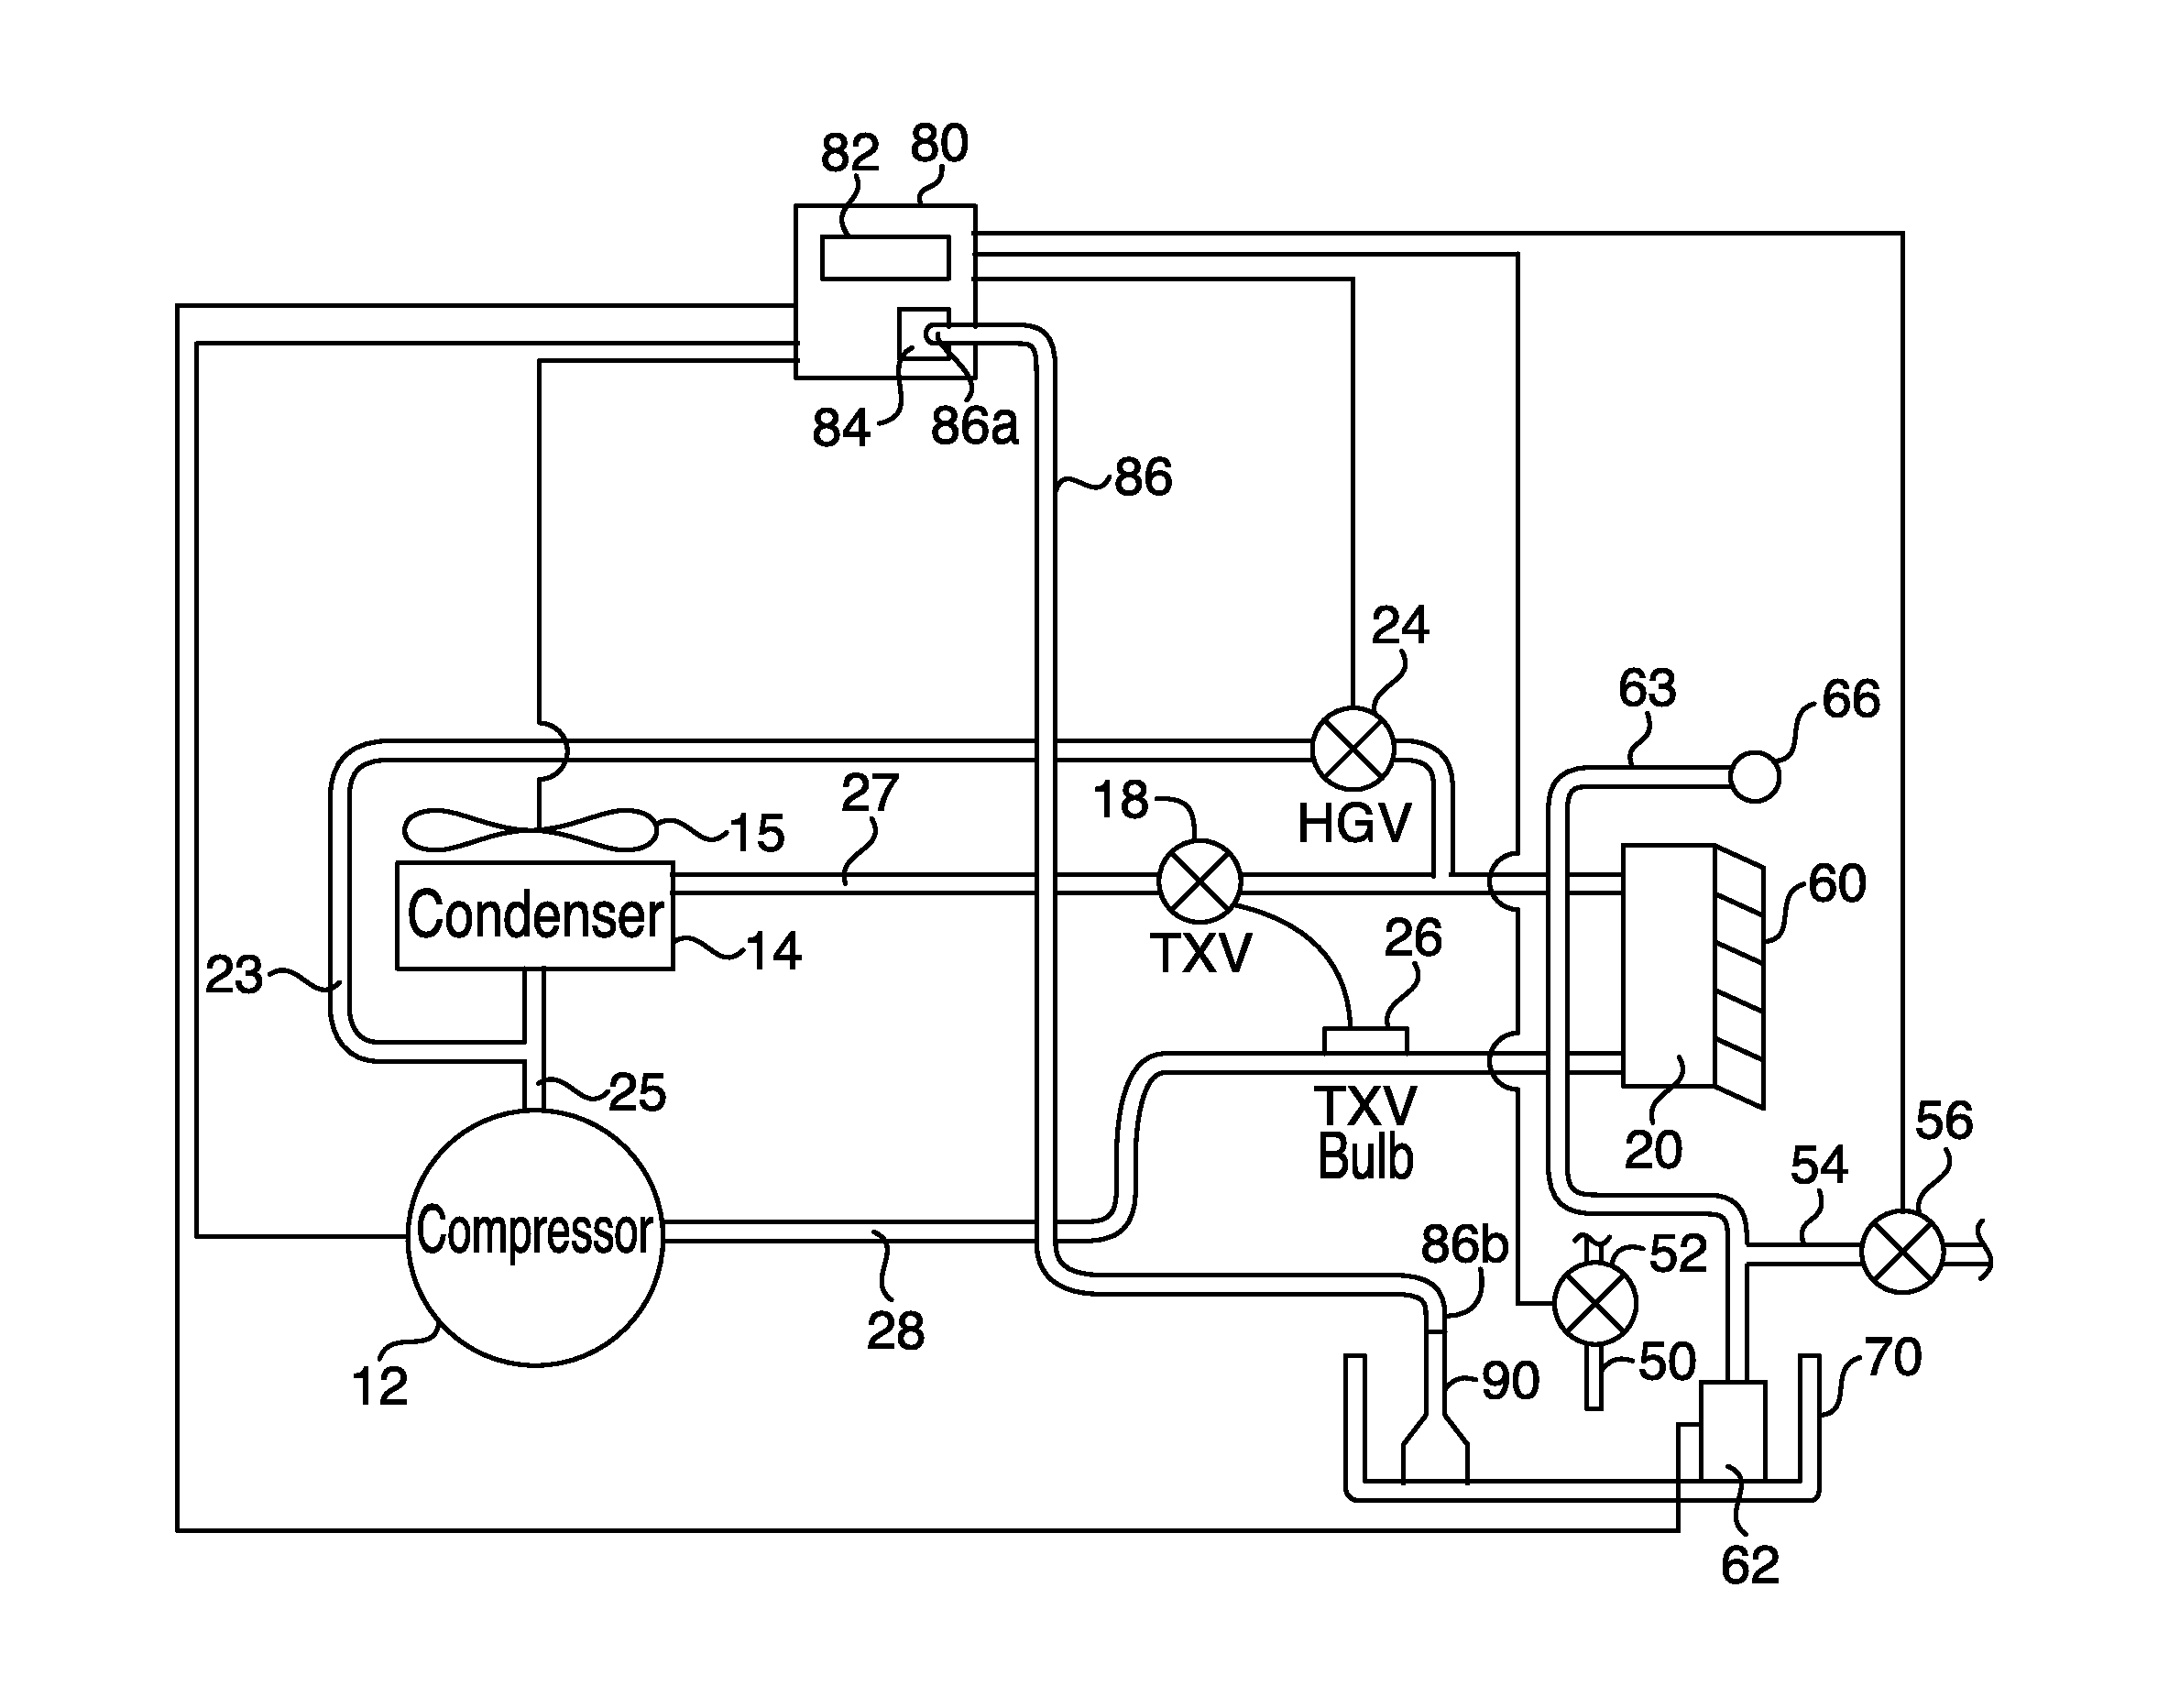 Apparatus and method for sensing ice thickness and detecting failure modes of an ice maker